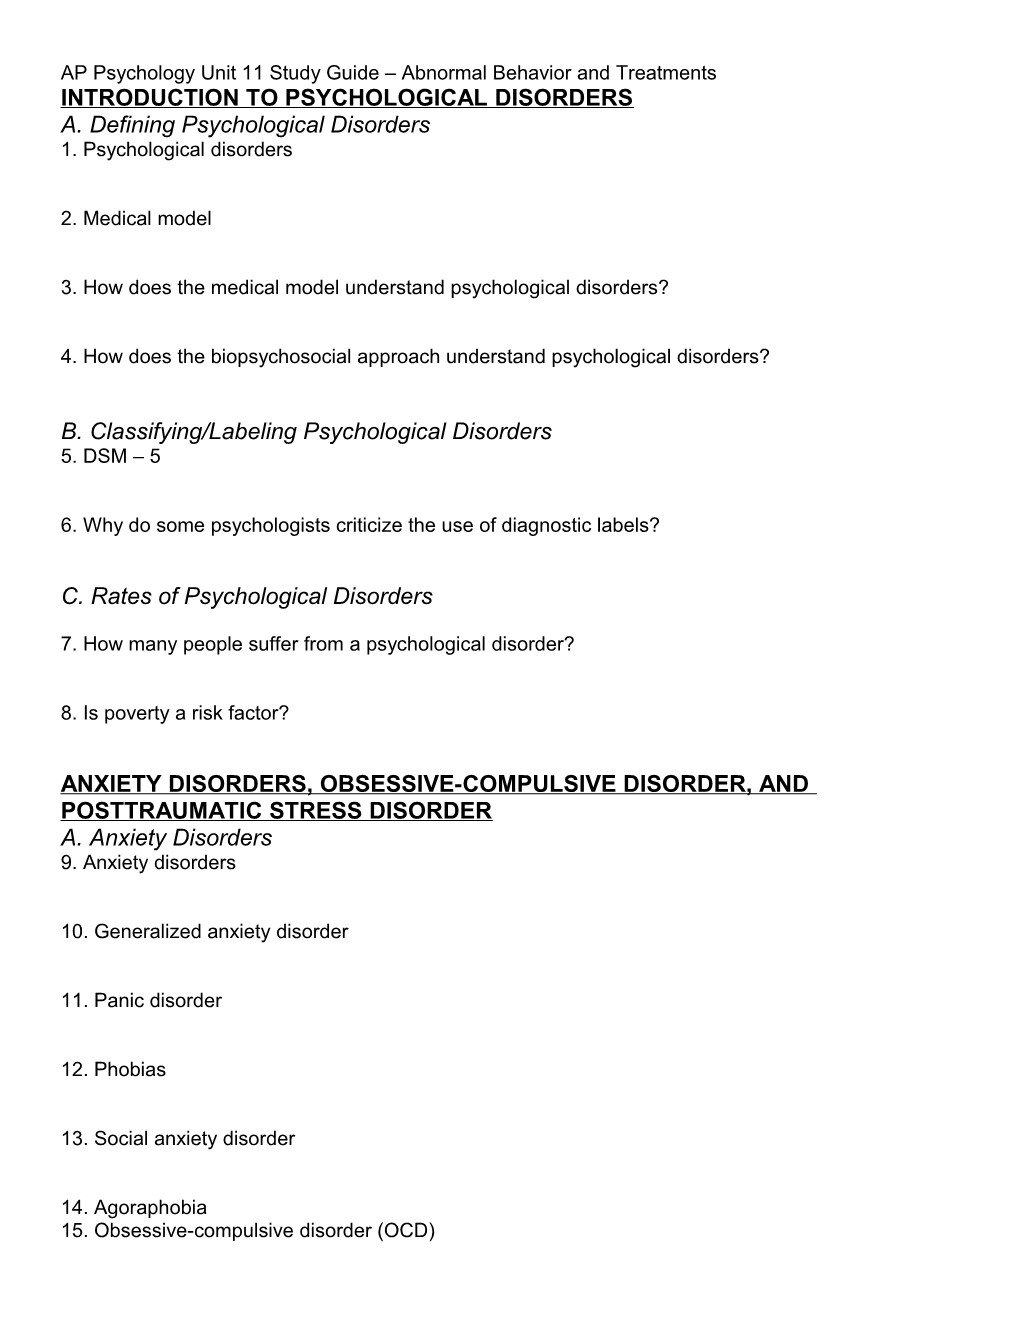 AP Psychology Unit 11 Study Guide Abnormal Behavior and Treatments